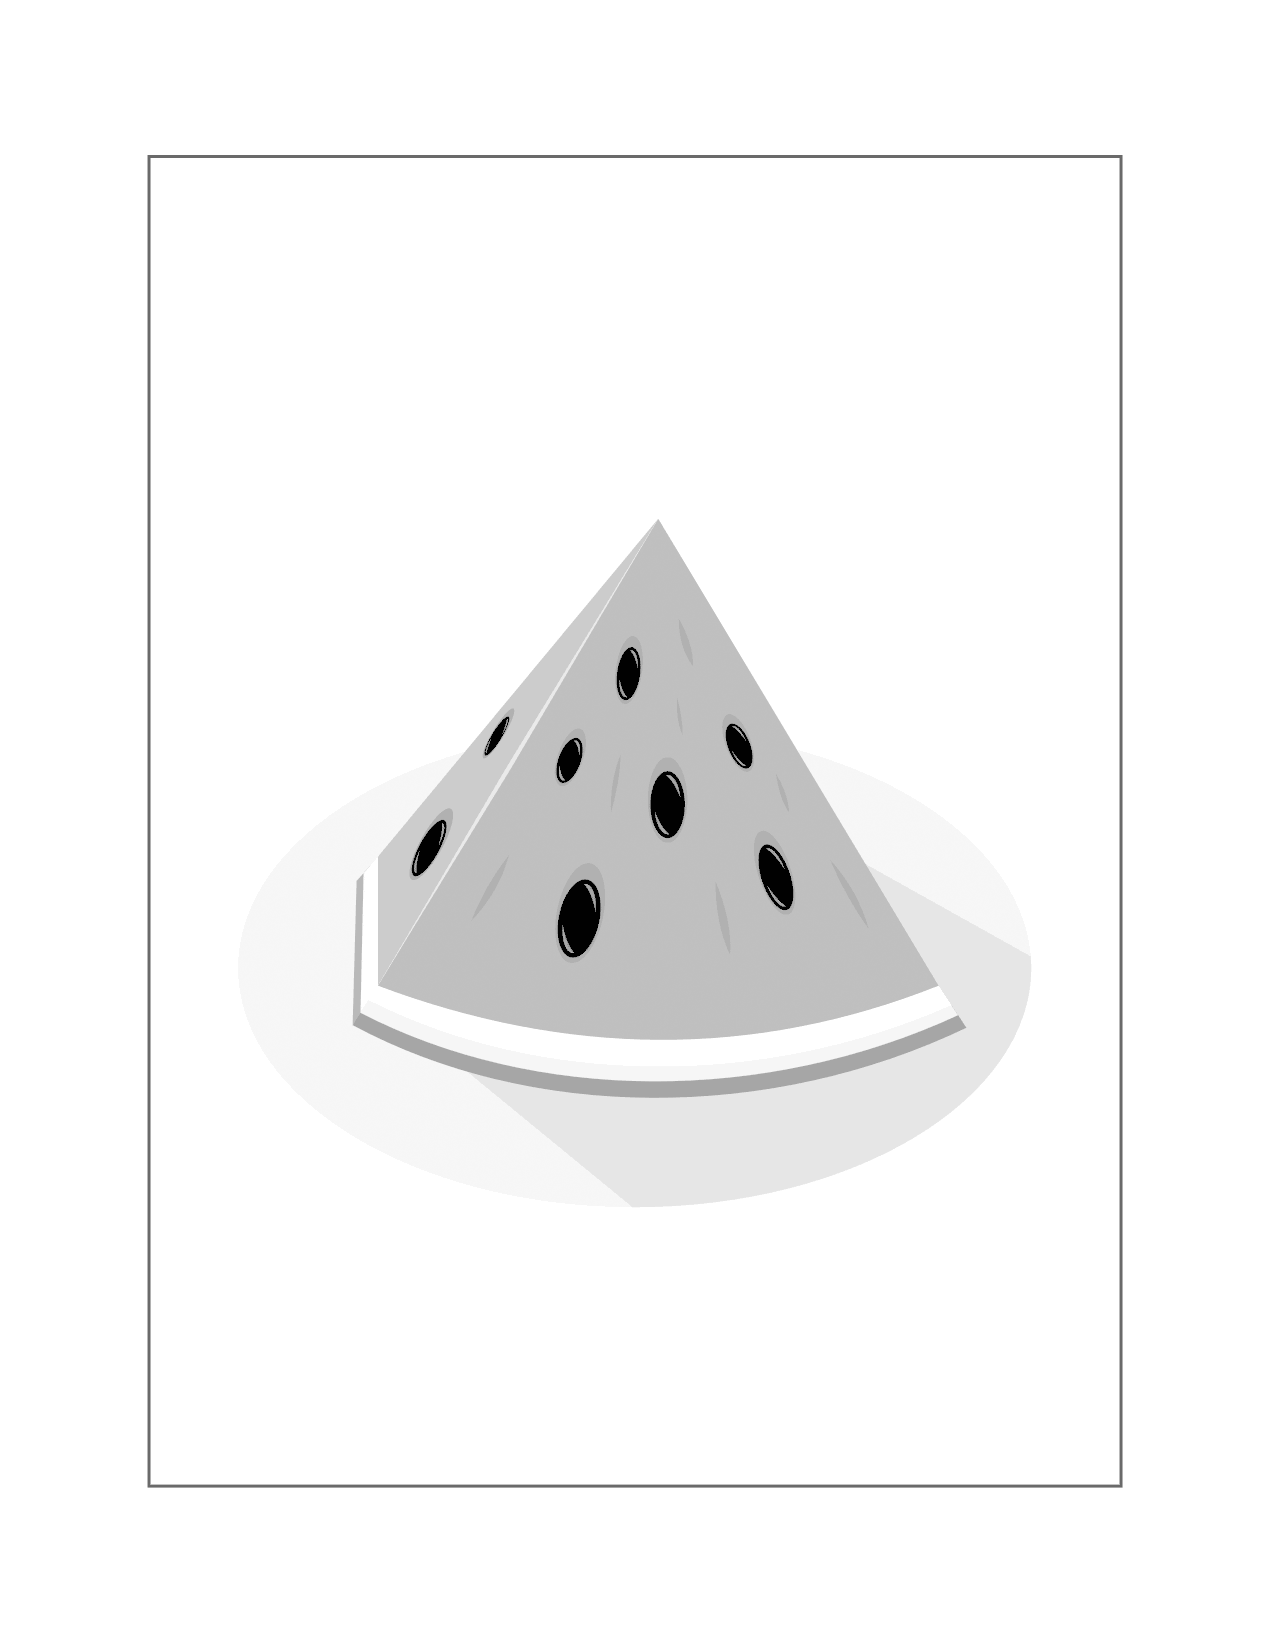 Watermelon Slice Tracing Sheet For Coloring